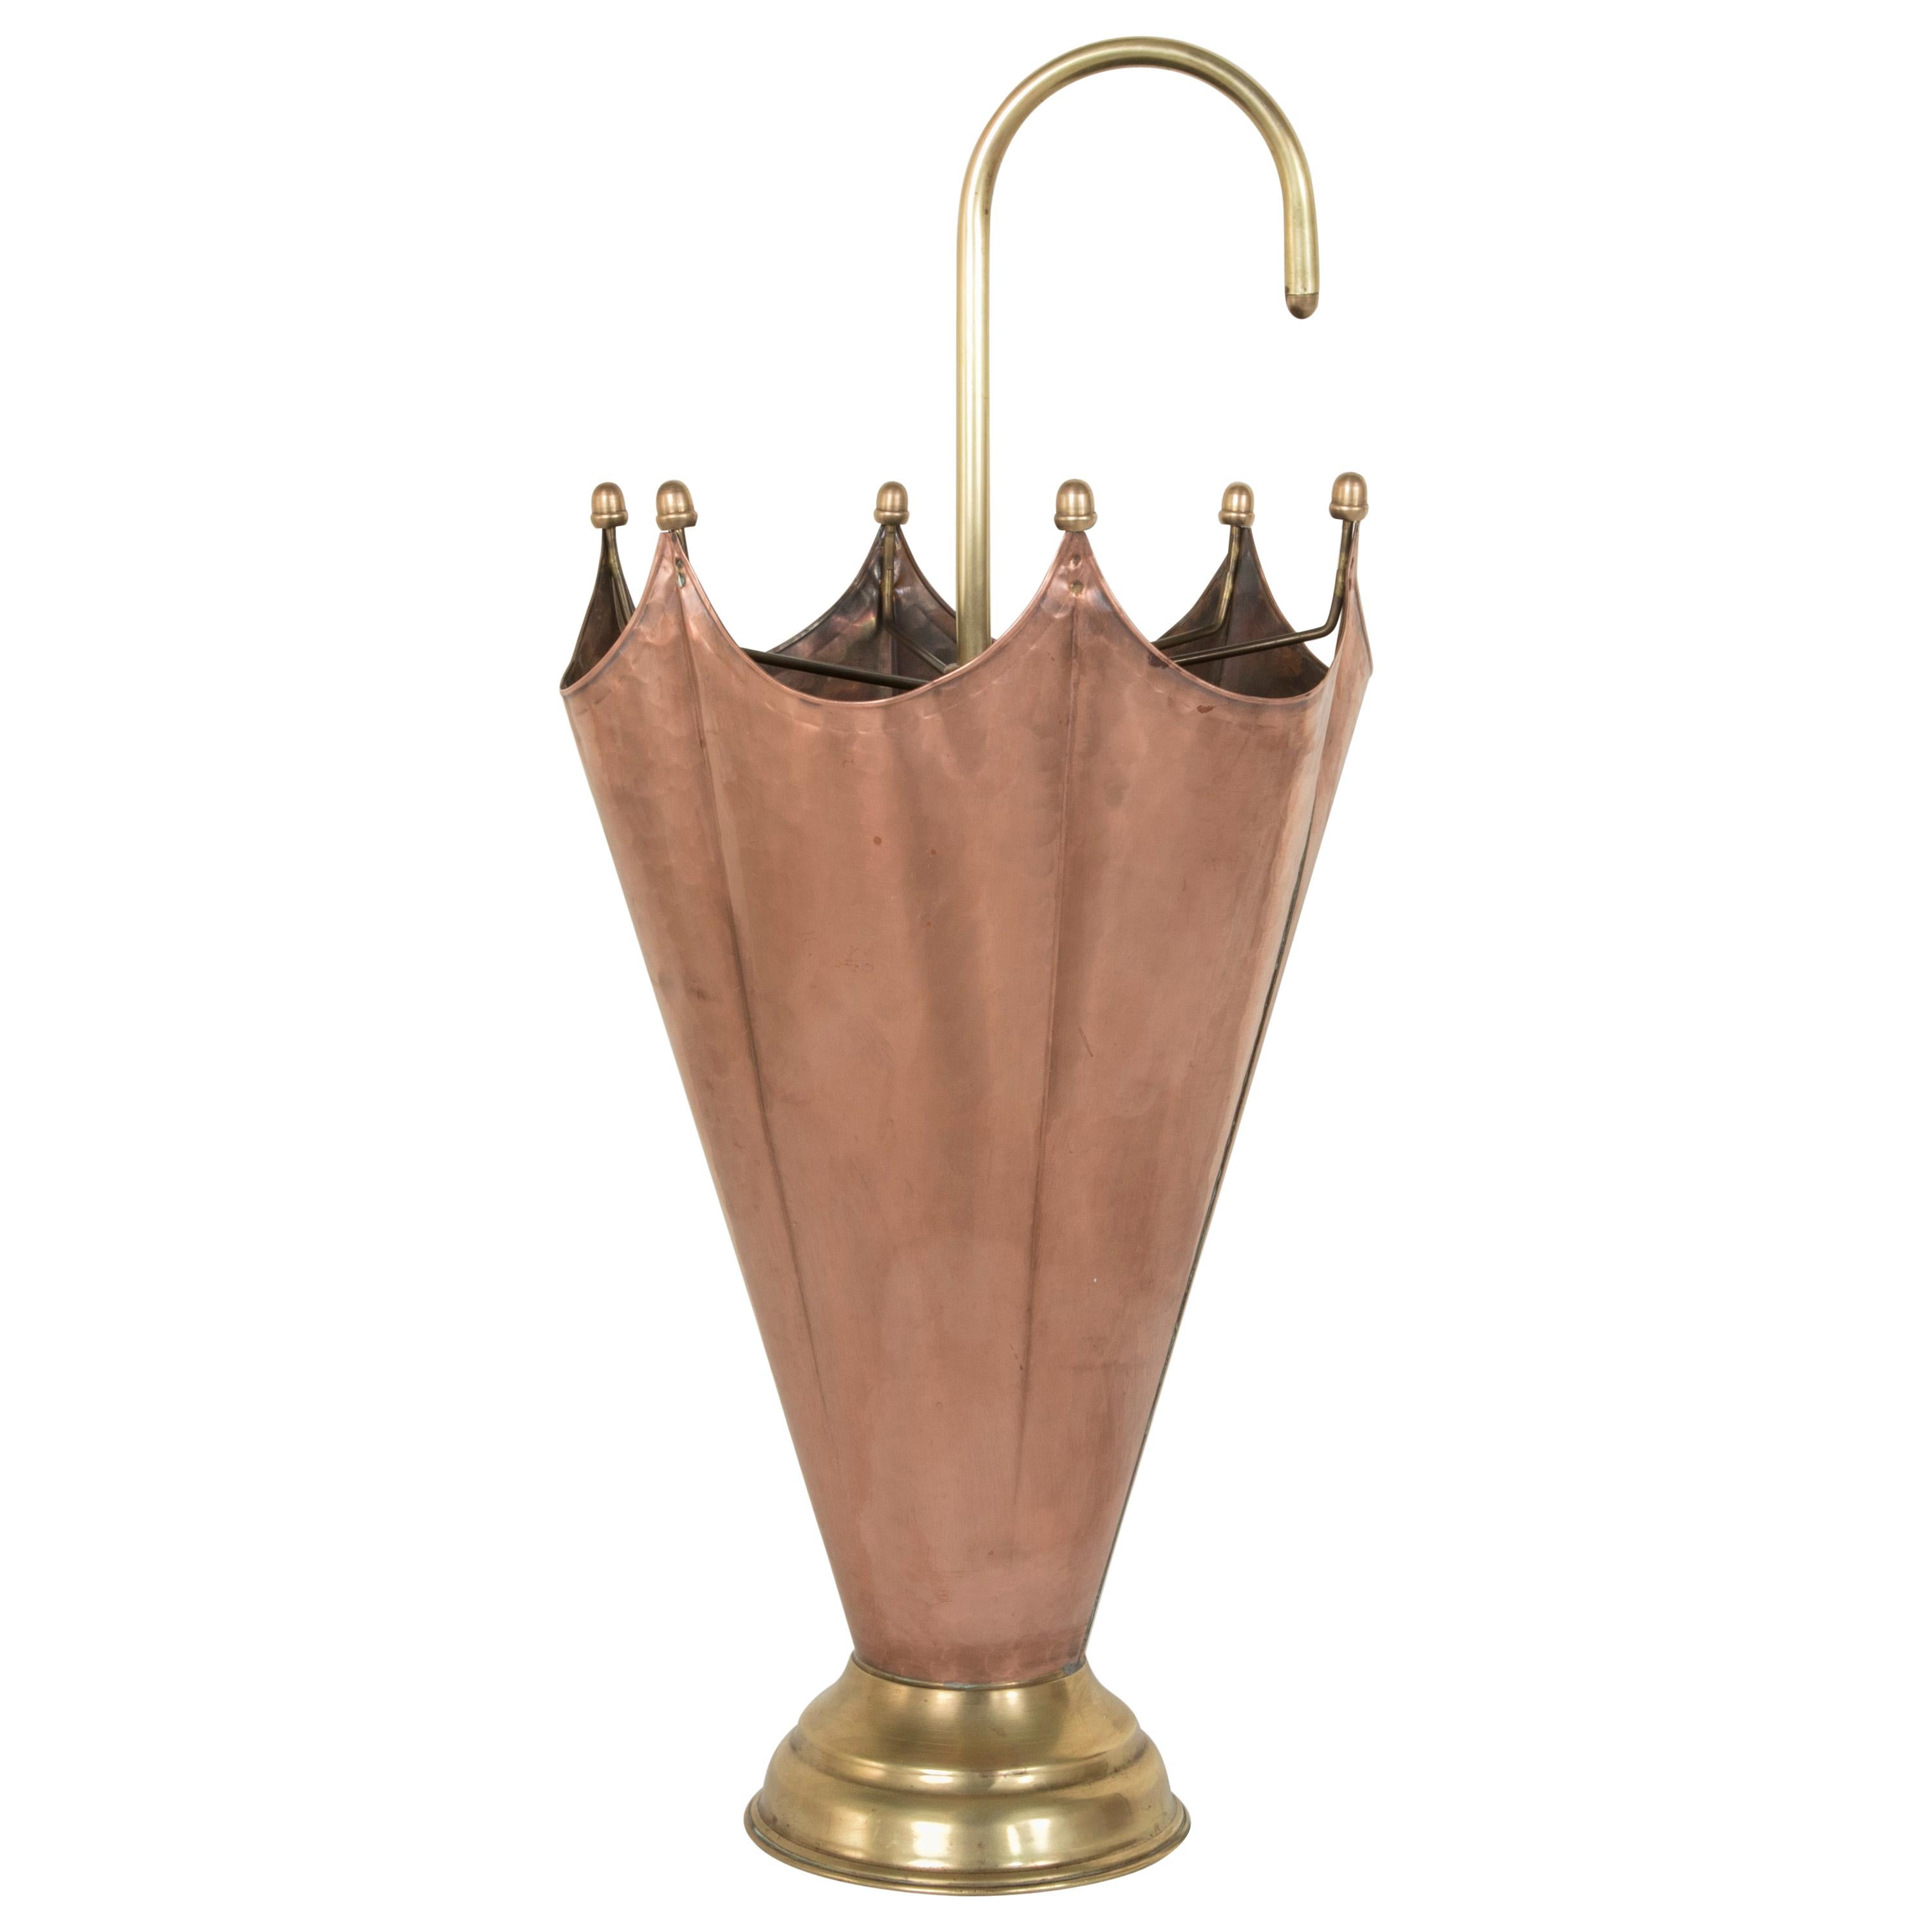 Midcentury French Copper and Brass Umbrella Holder or Umbrella Stand